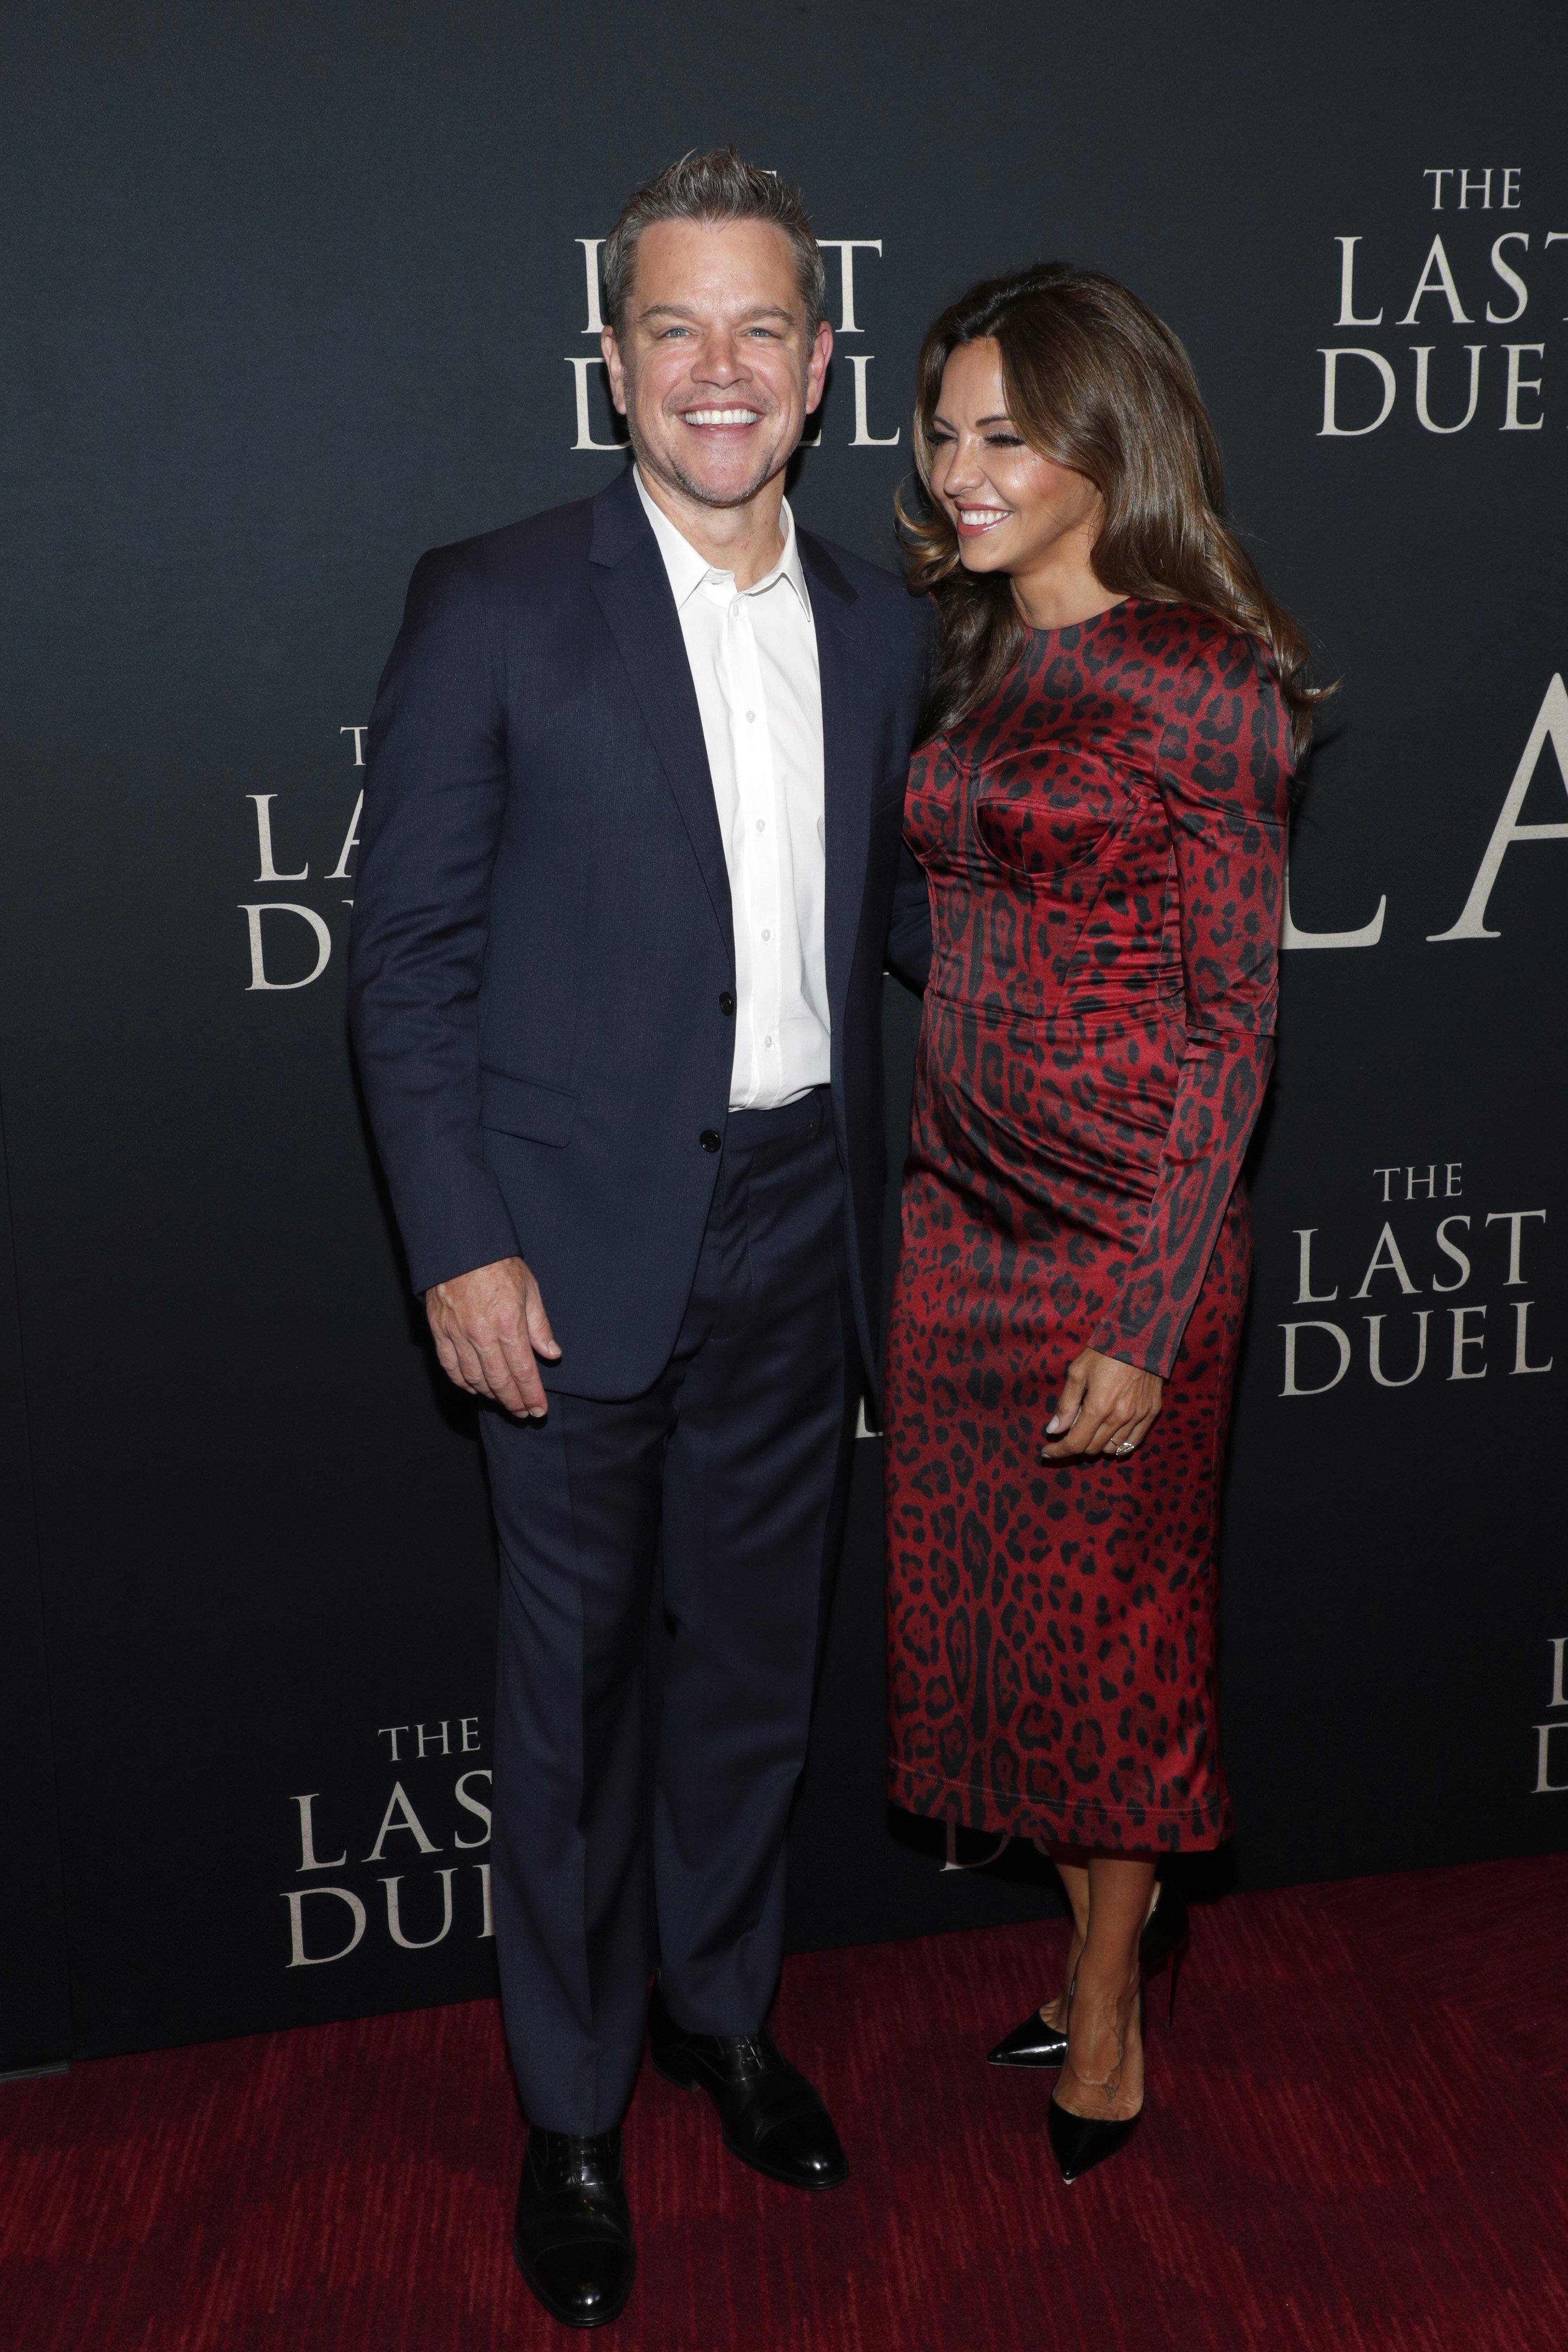 Matt Damon and Luciana Barroso during The Last Duel New York Premiere on October 09, 2021 in New York City. | Source: Getty Images